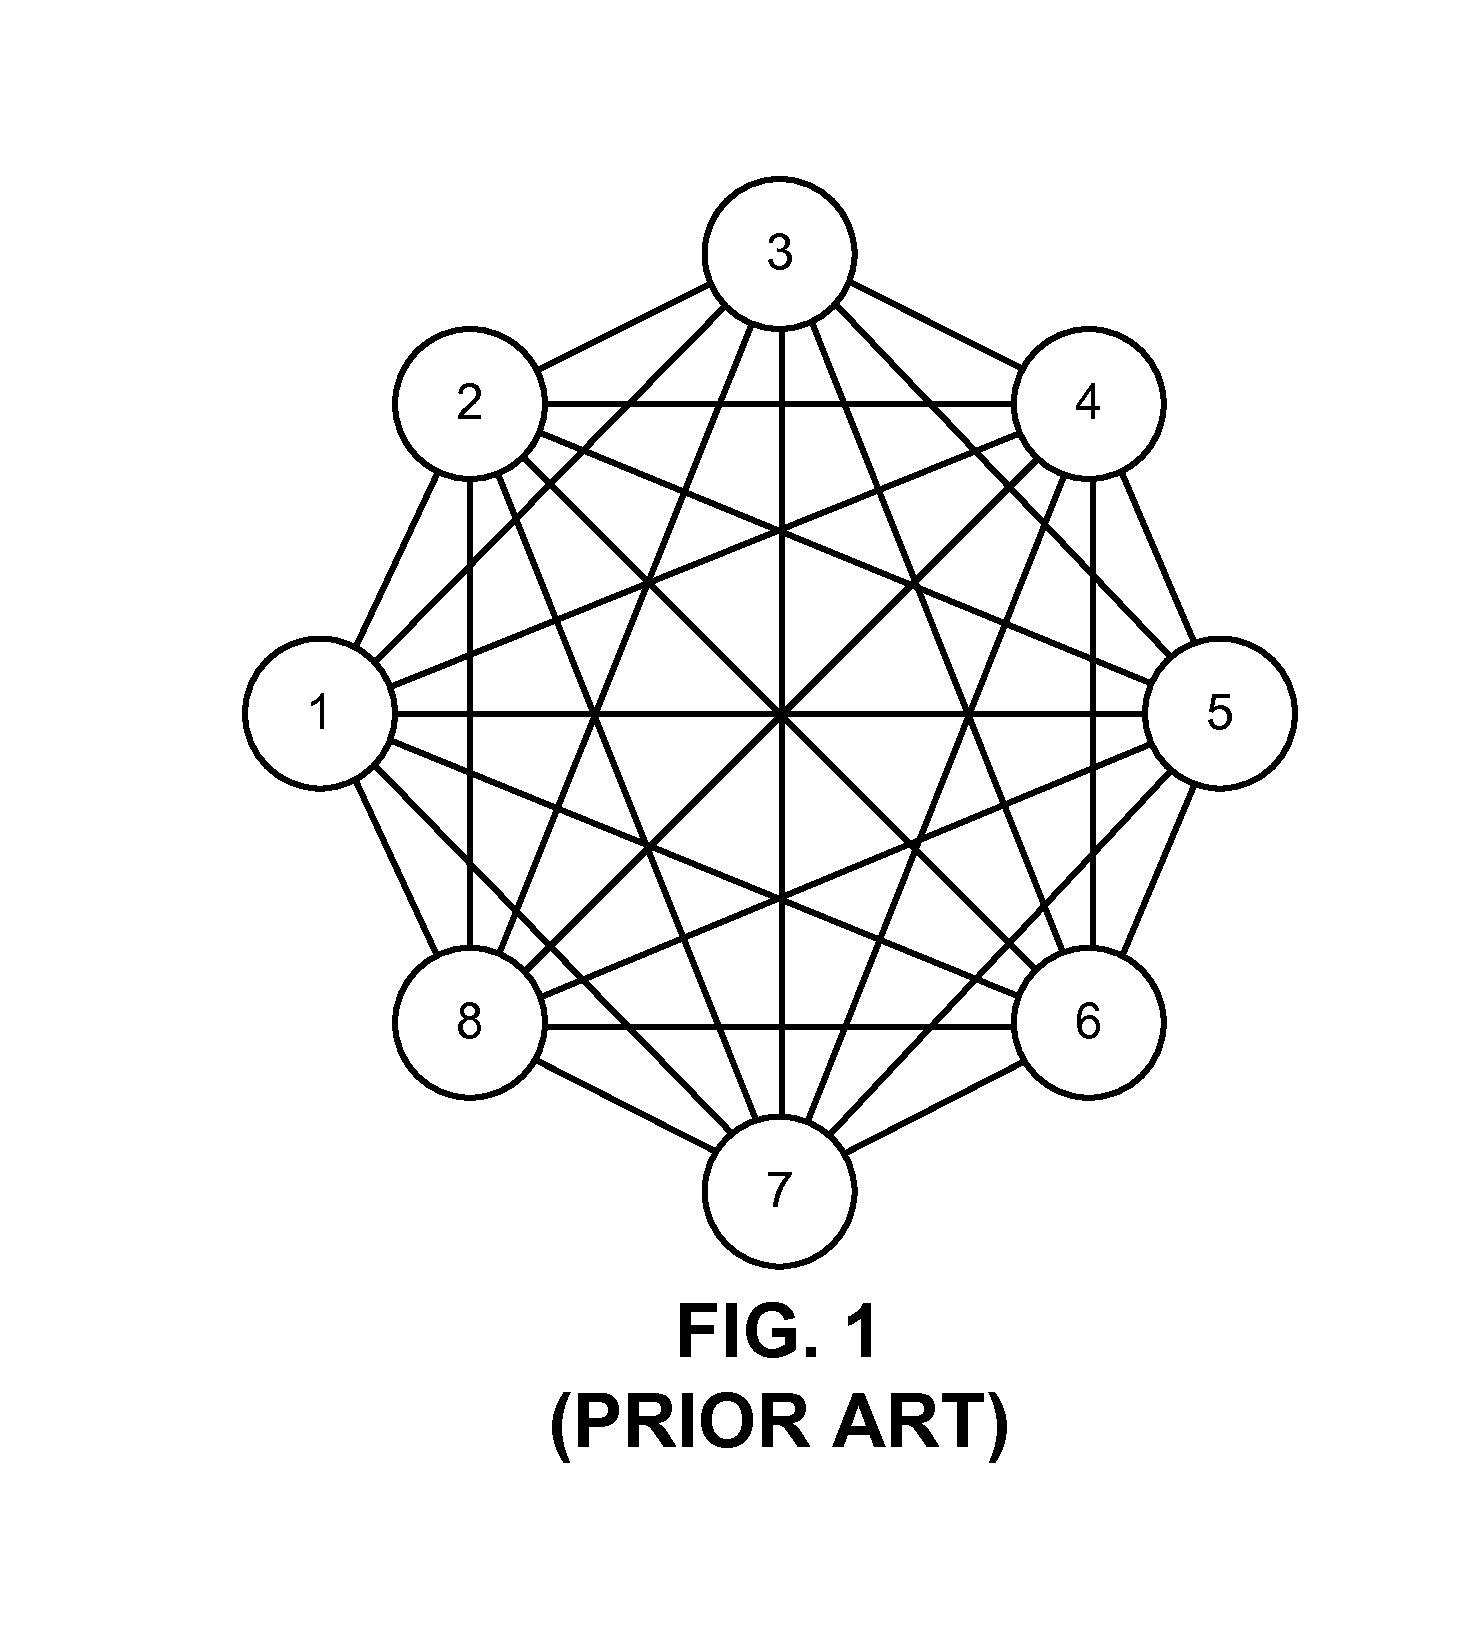 Single- layer full-mesh, point-to-point network